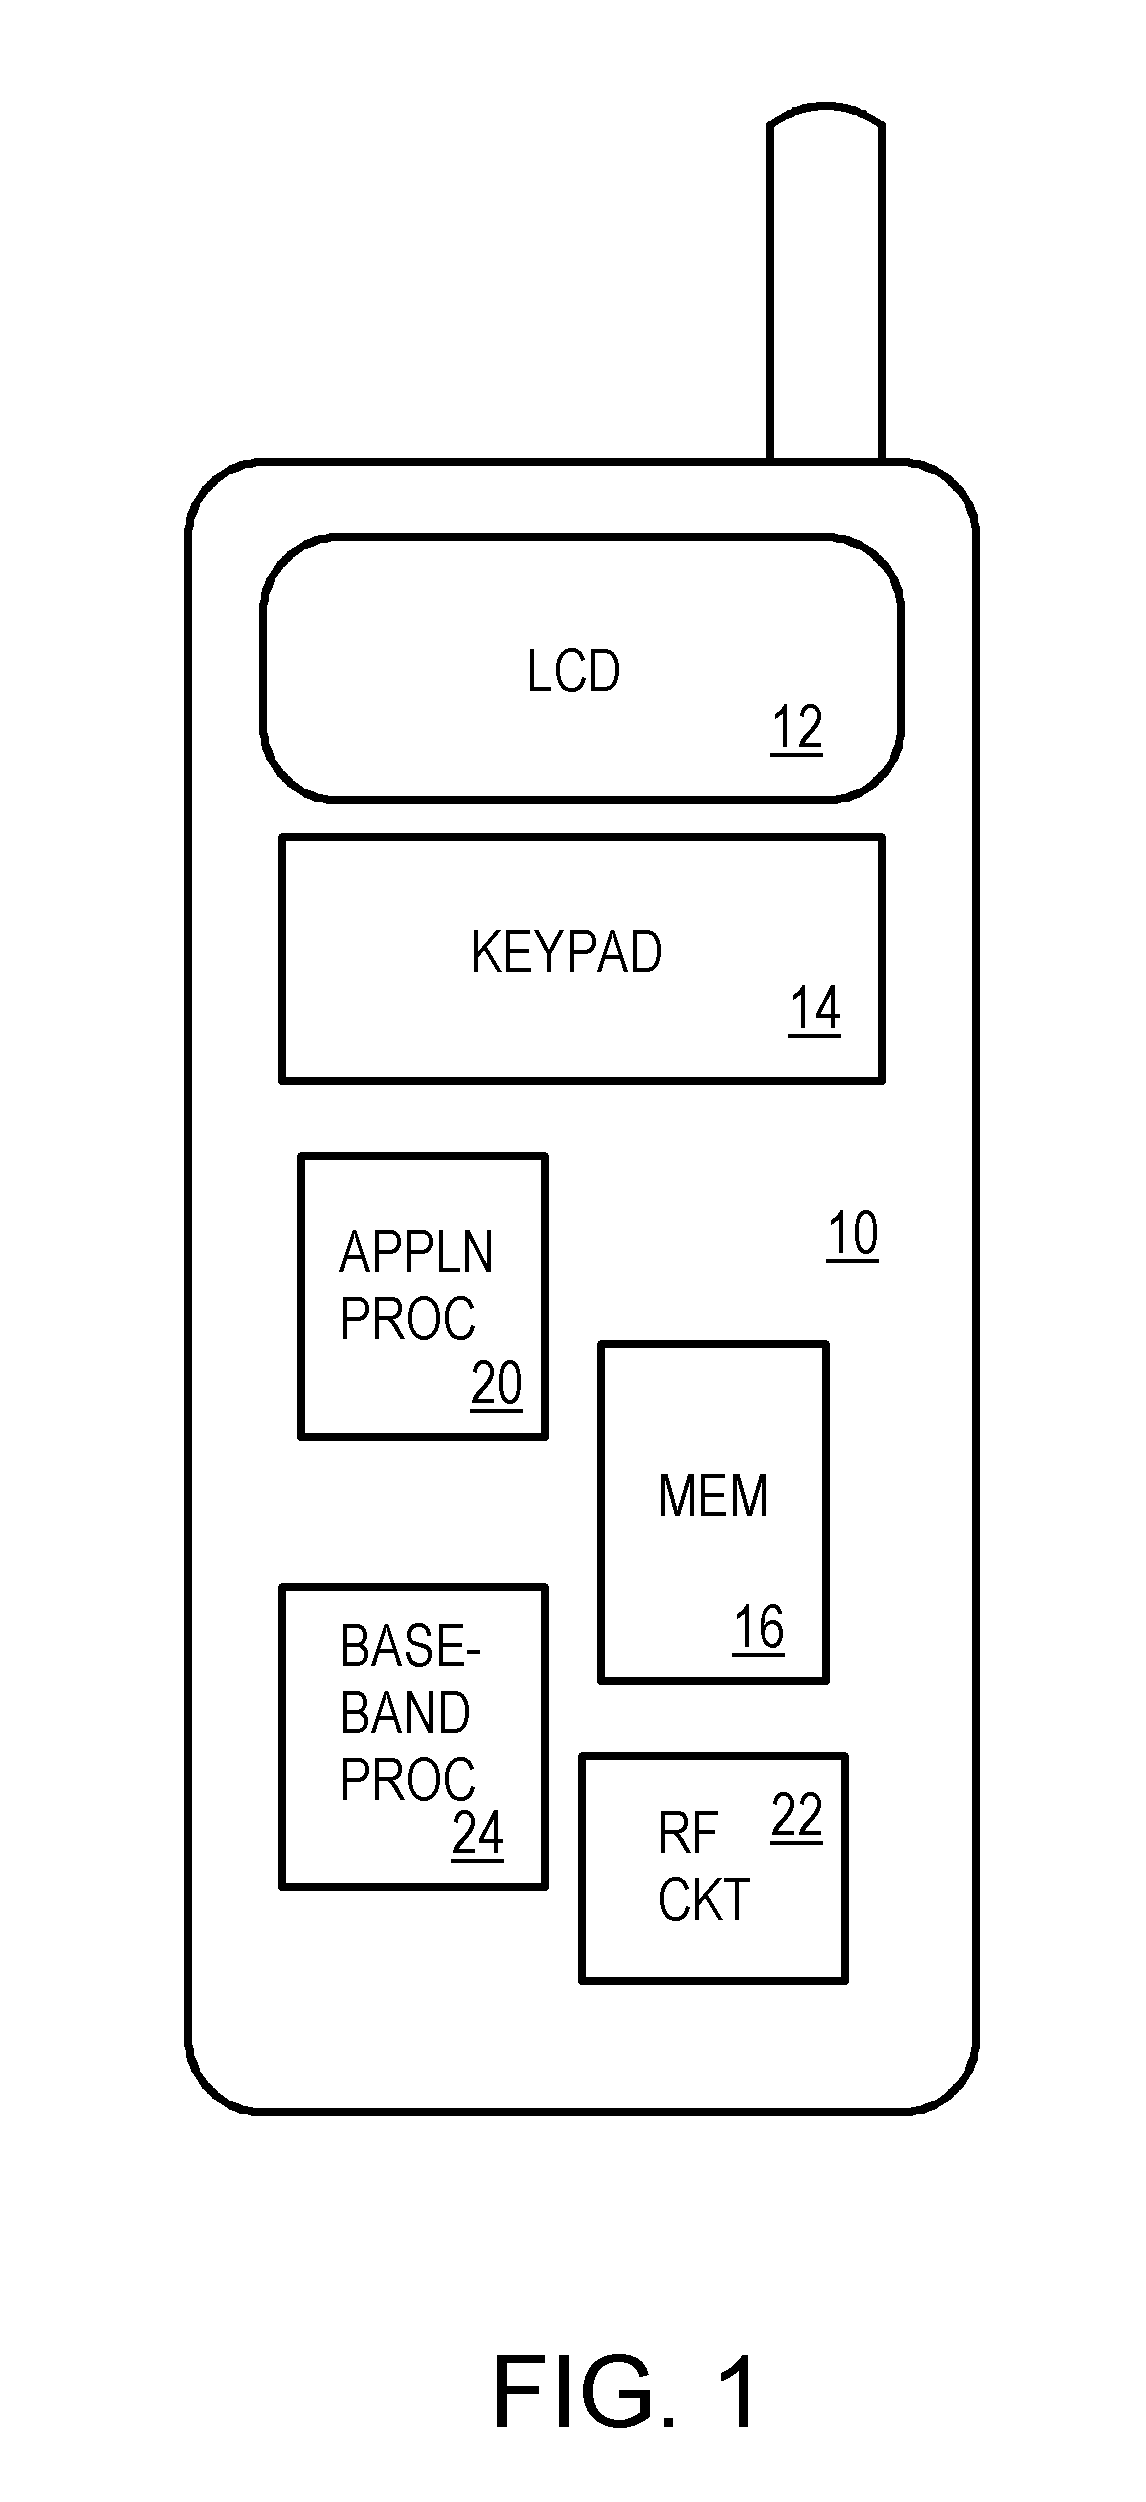 Ethernet emulation using a shared mailbox between two processors in a feature phone